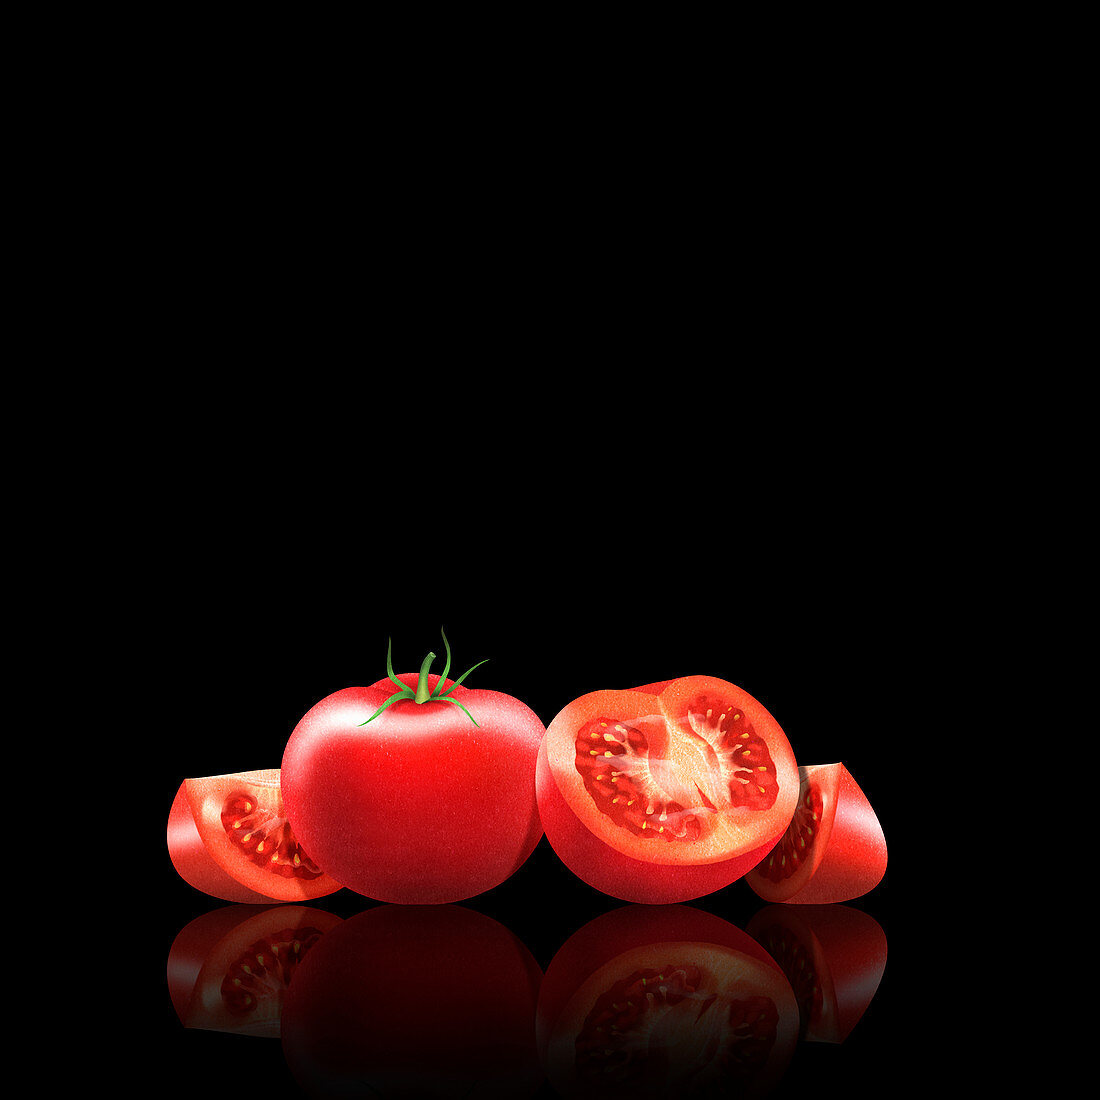 Fresh tomatoes, whole, halved and slices, illustration